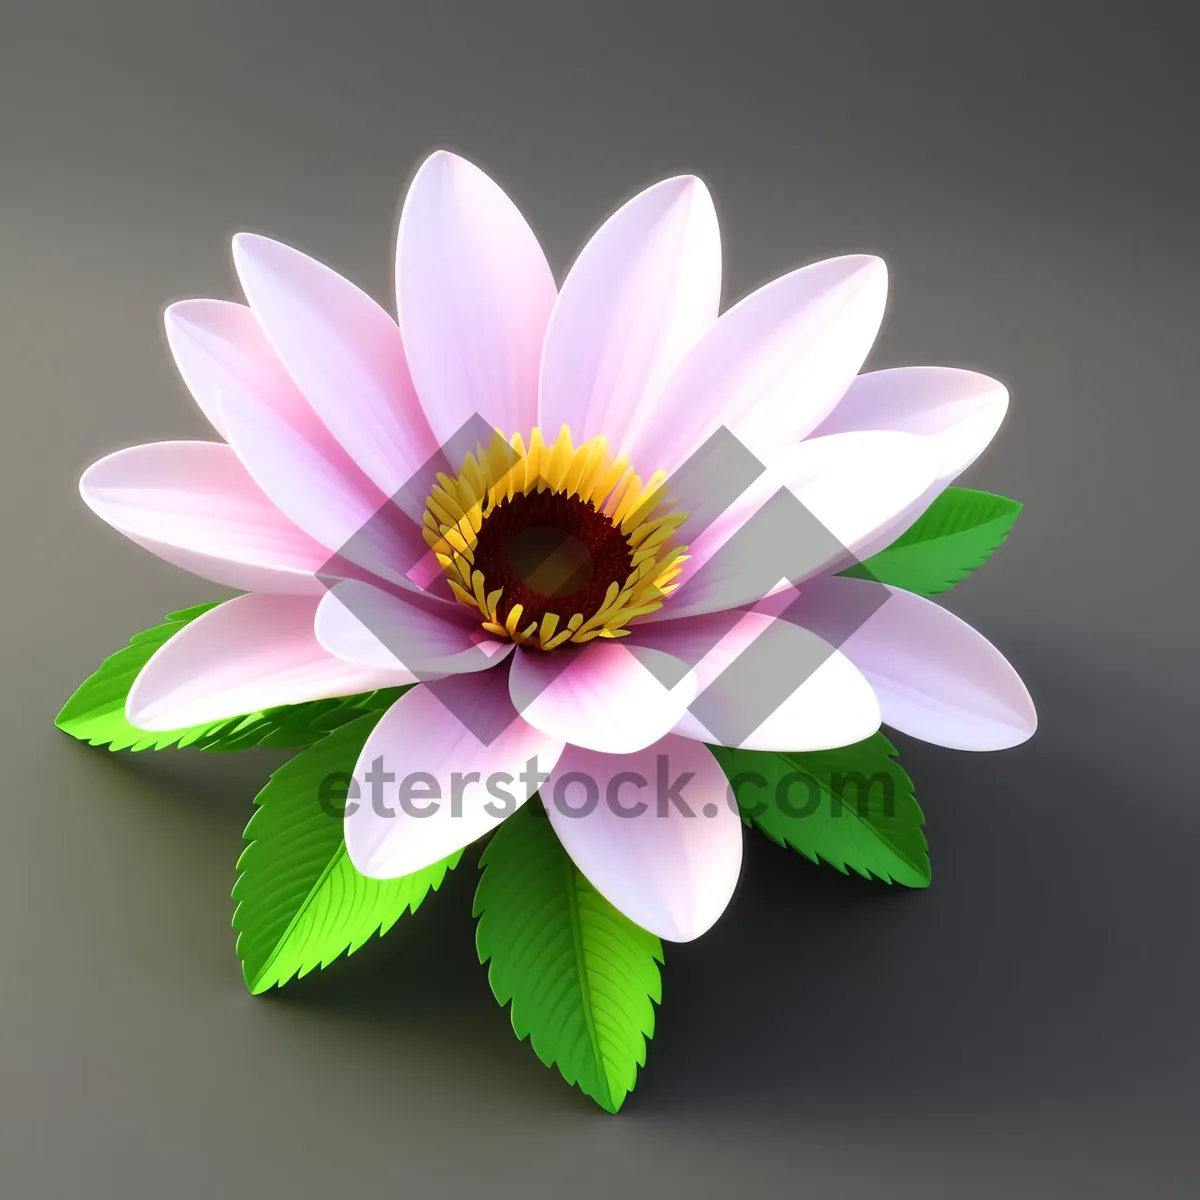 Picture of Pink Lotus Blossom: Delicate Floral Petals in Full Bloom